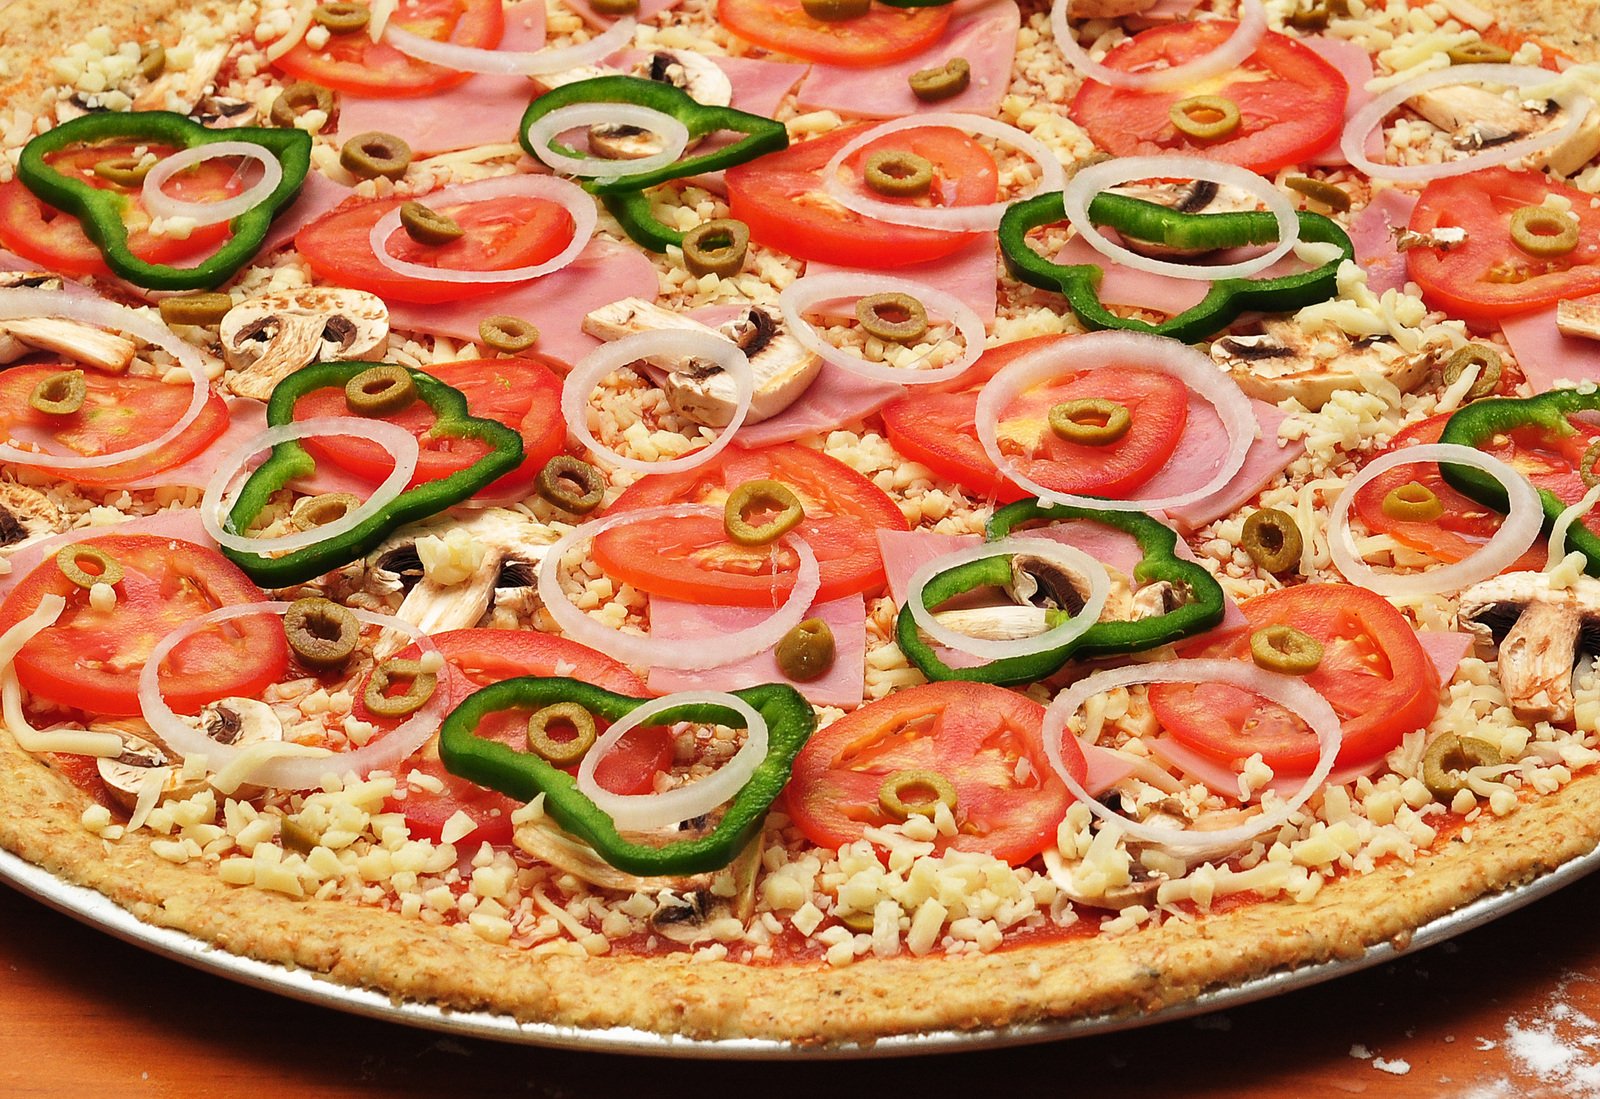 this pizza has cheese, onions, and tomatoes on top